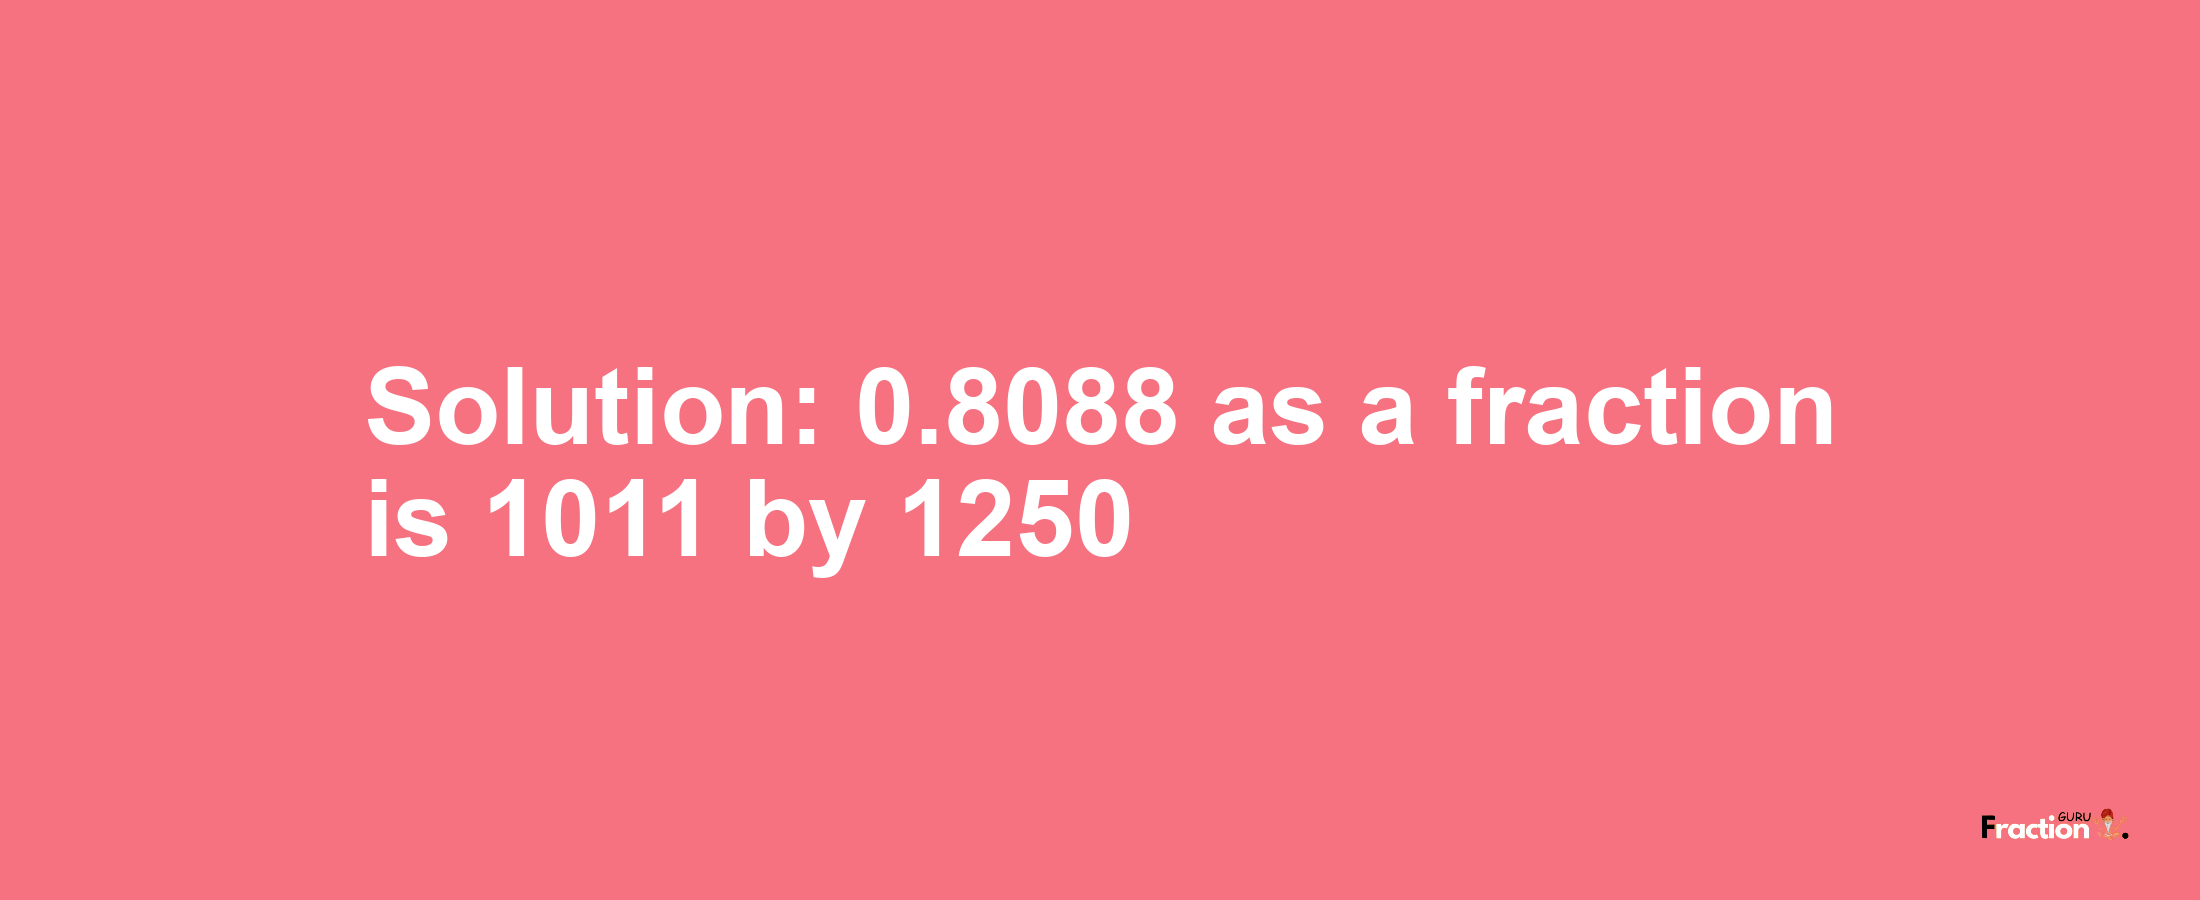 Solution:0.8088 as a fraction is 1011/1250